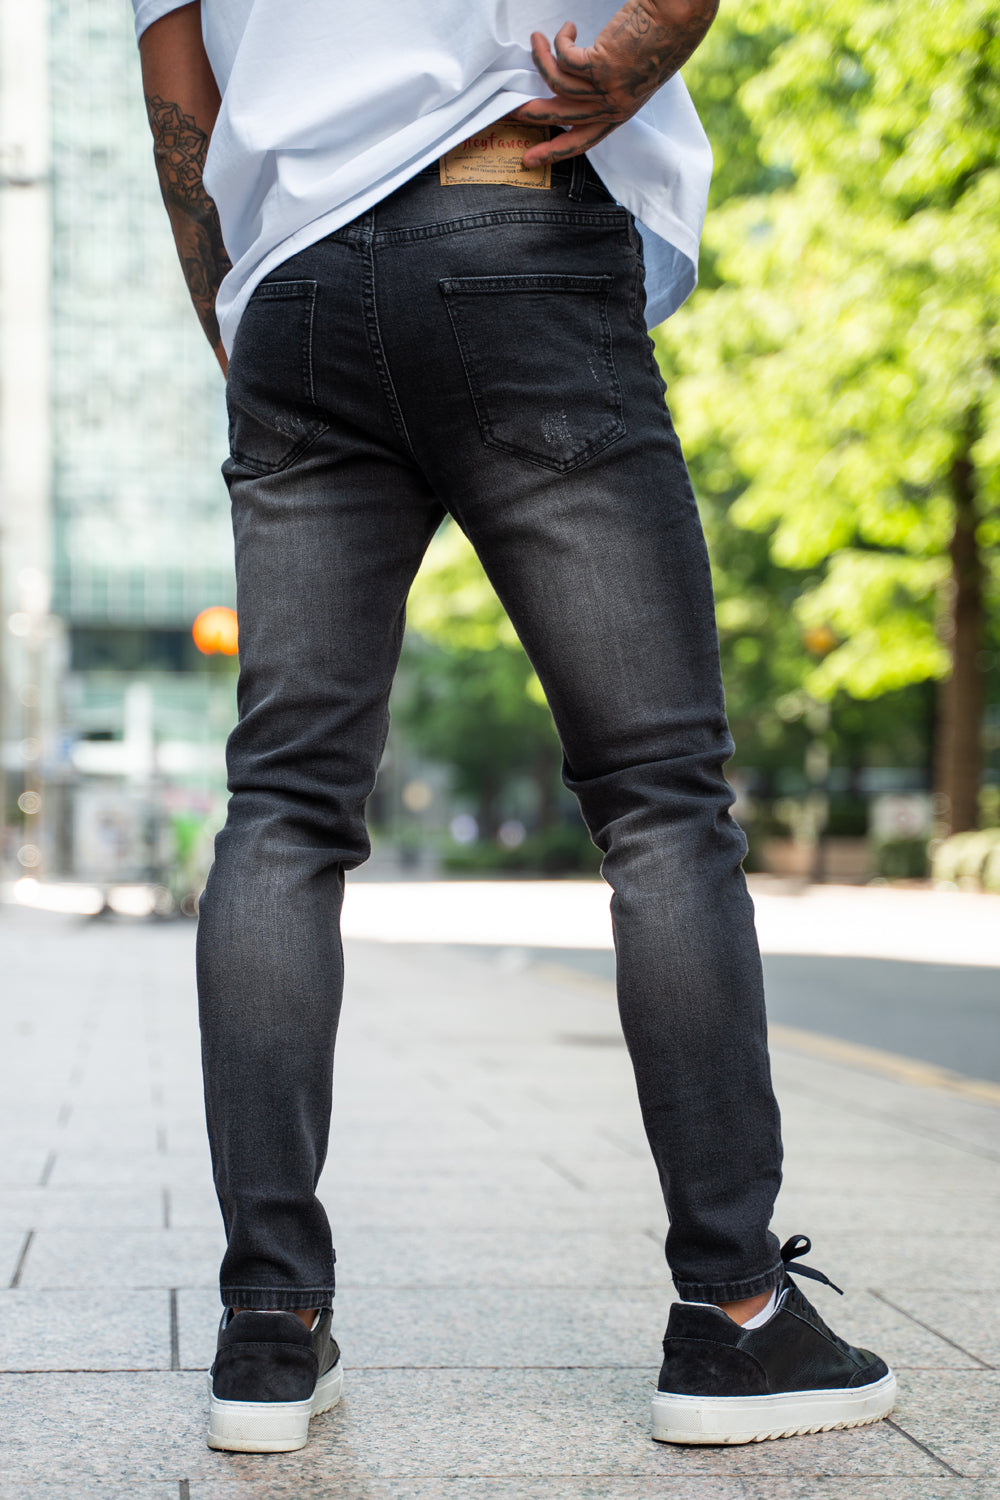 Gingtto: Embrace Confidence and Style with our Slim-Fit Denim